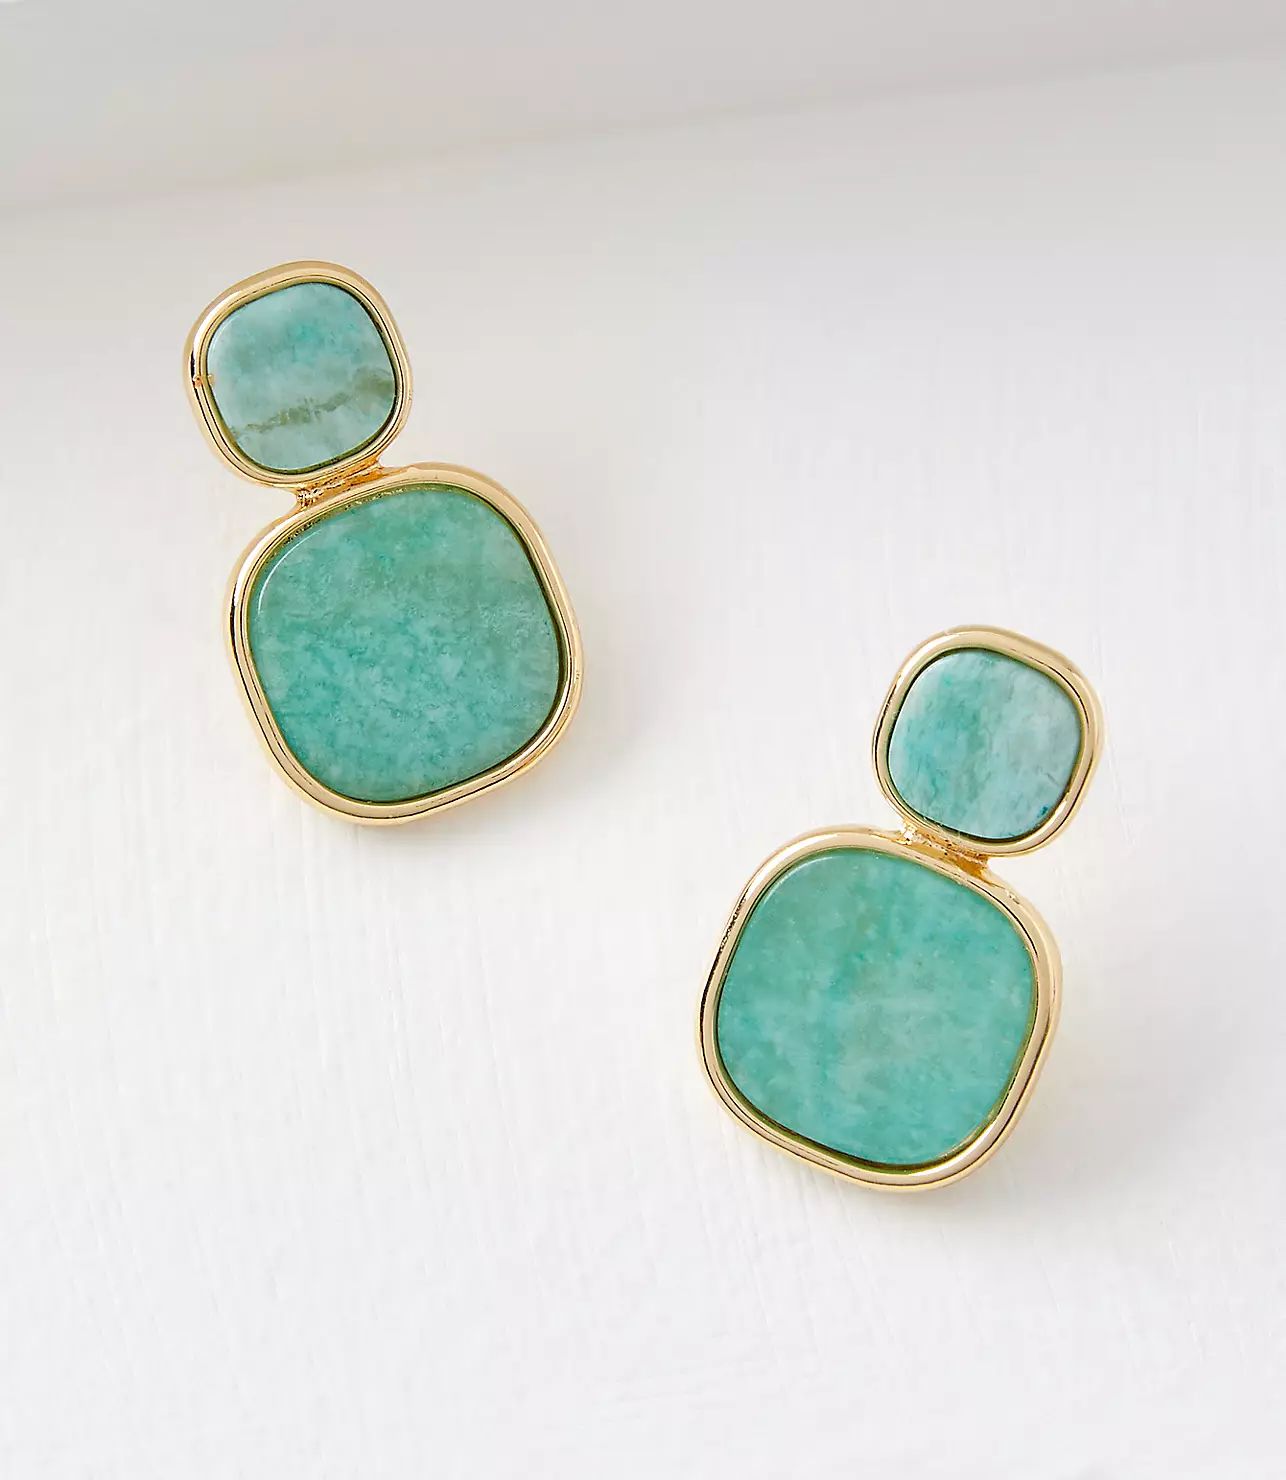 Rounded Square Drop Earrings | LOFT